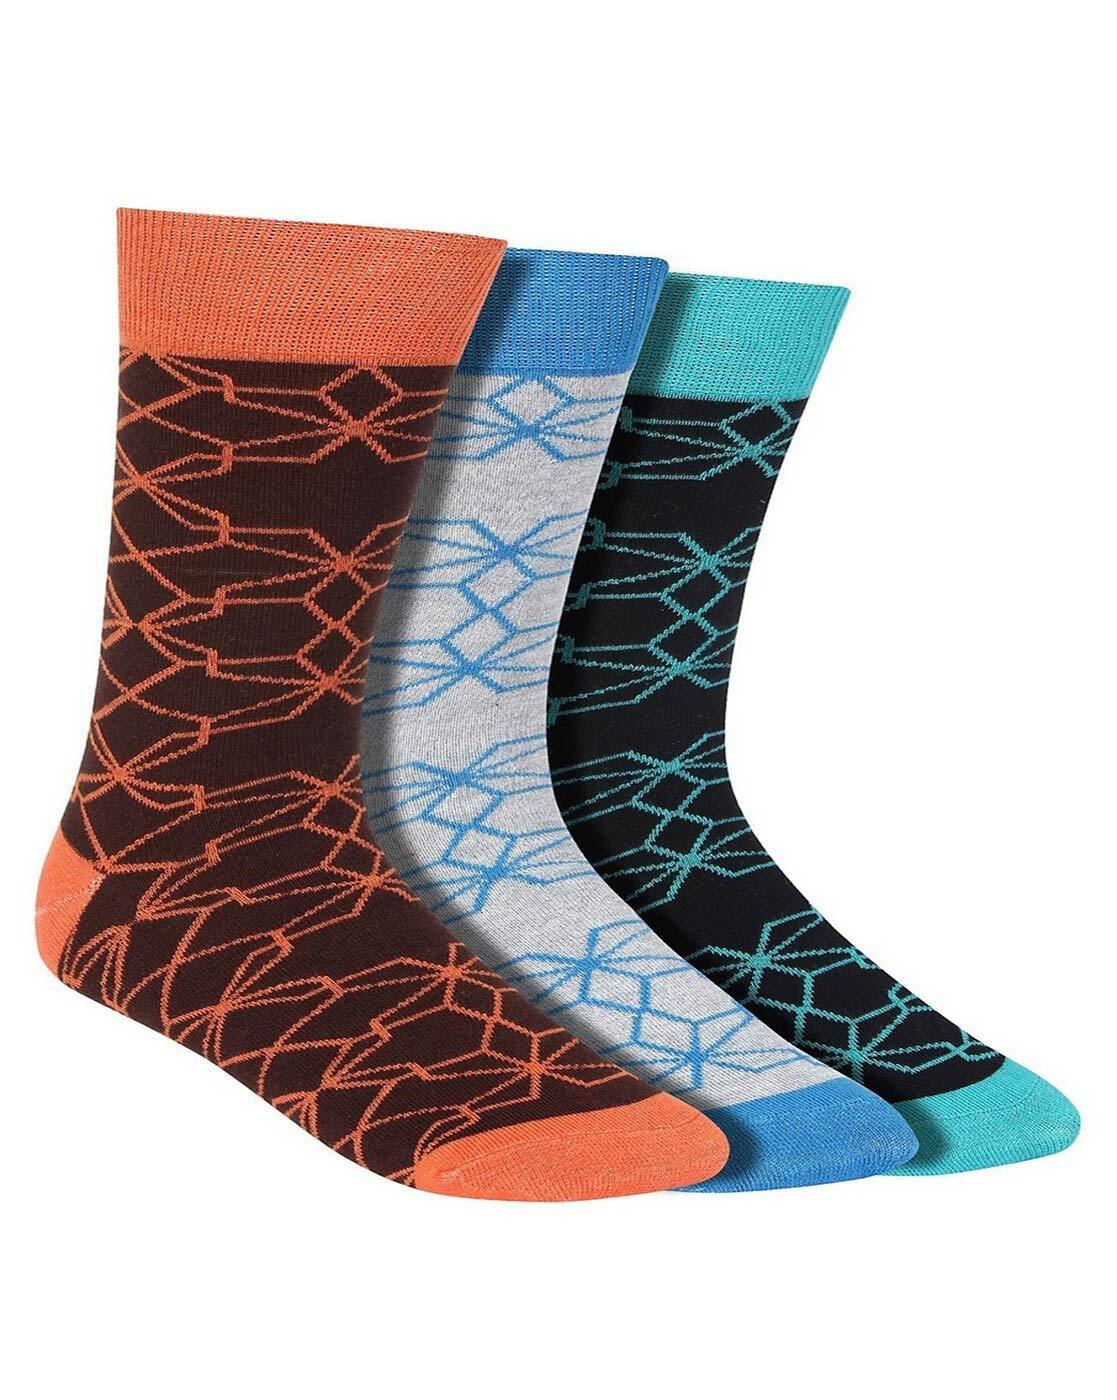 Buy Assorted Socks for Men by Creature Online